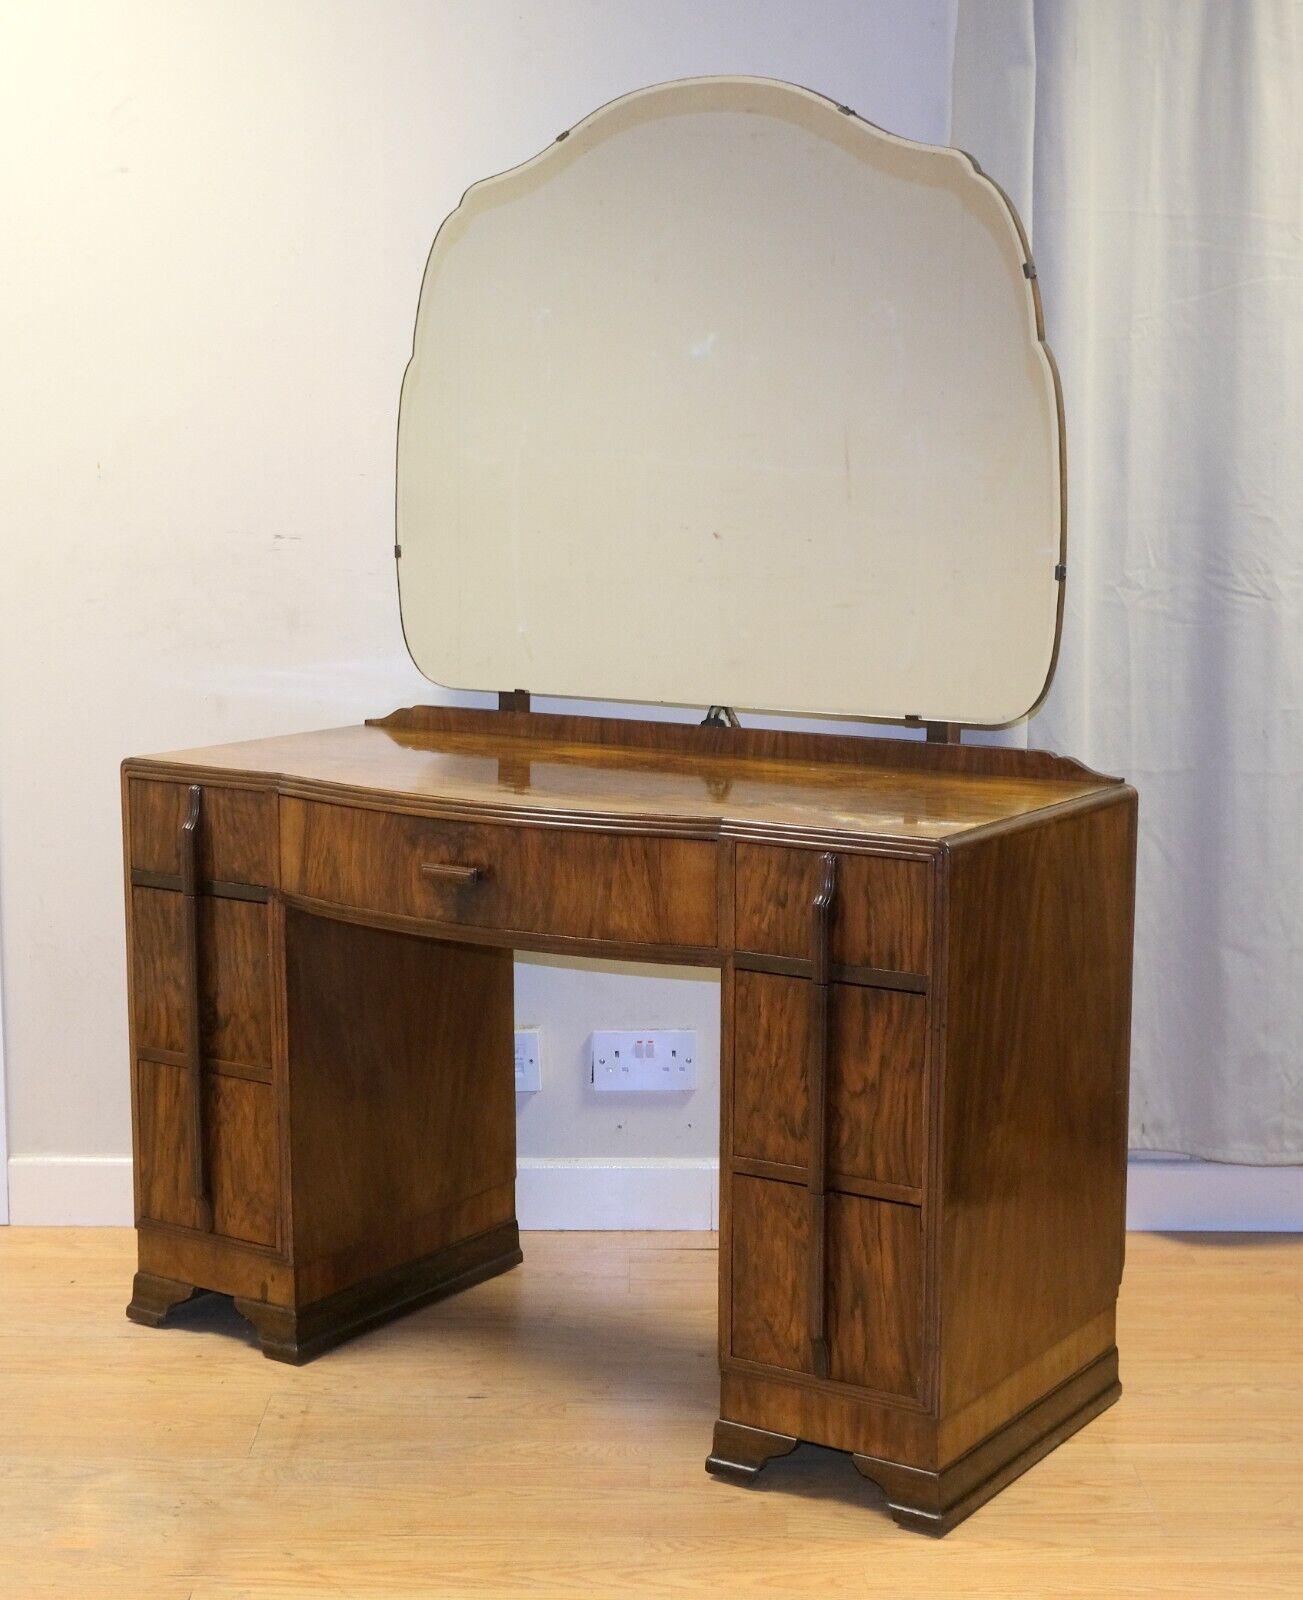 We are delighted to offer for sale this stunning 1920's Art Deco burr walnut dressing table with mirror and drawers.

This piece offers you a nice colour with original handles from the 1920's, Art Deco period. This dressing table is a well made